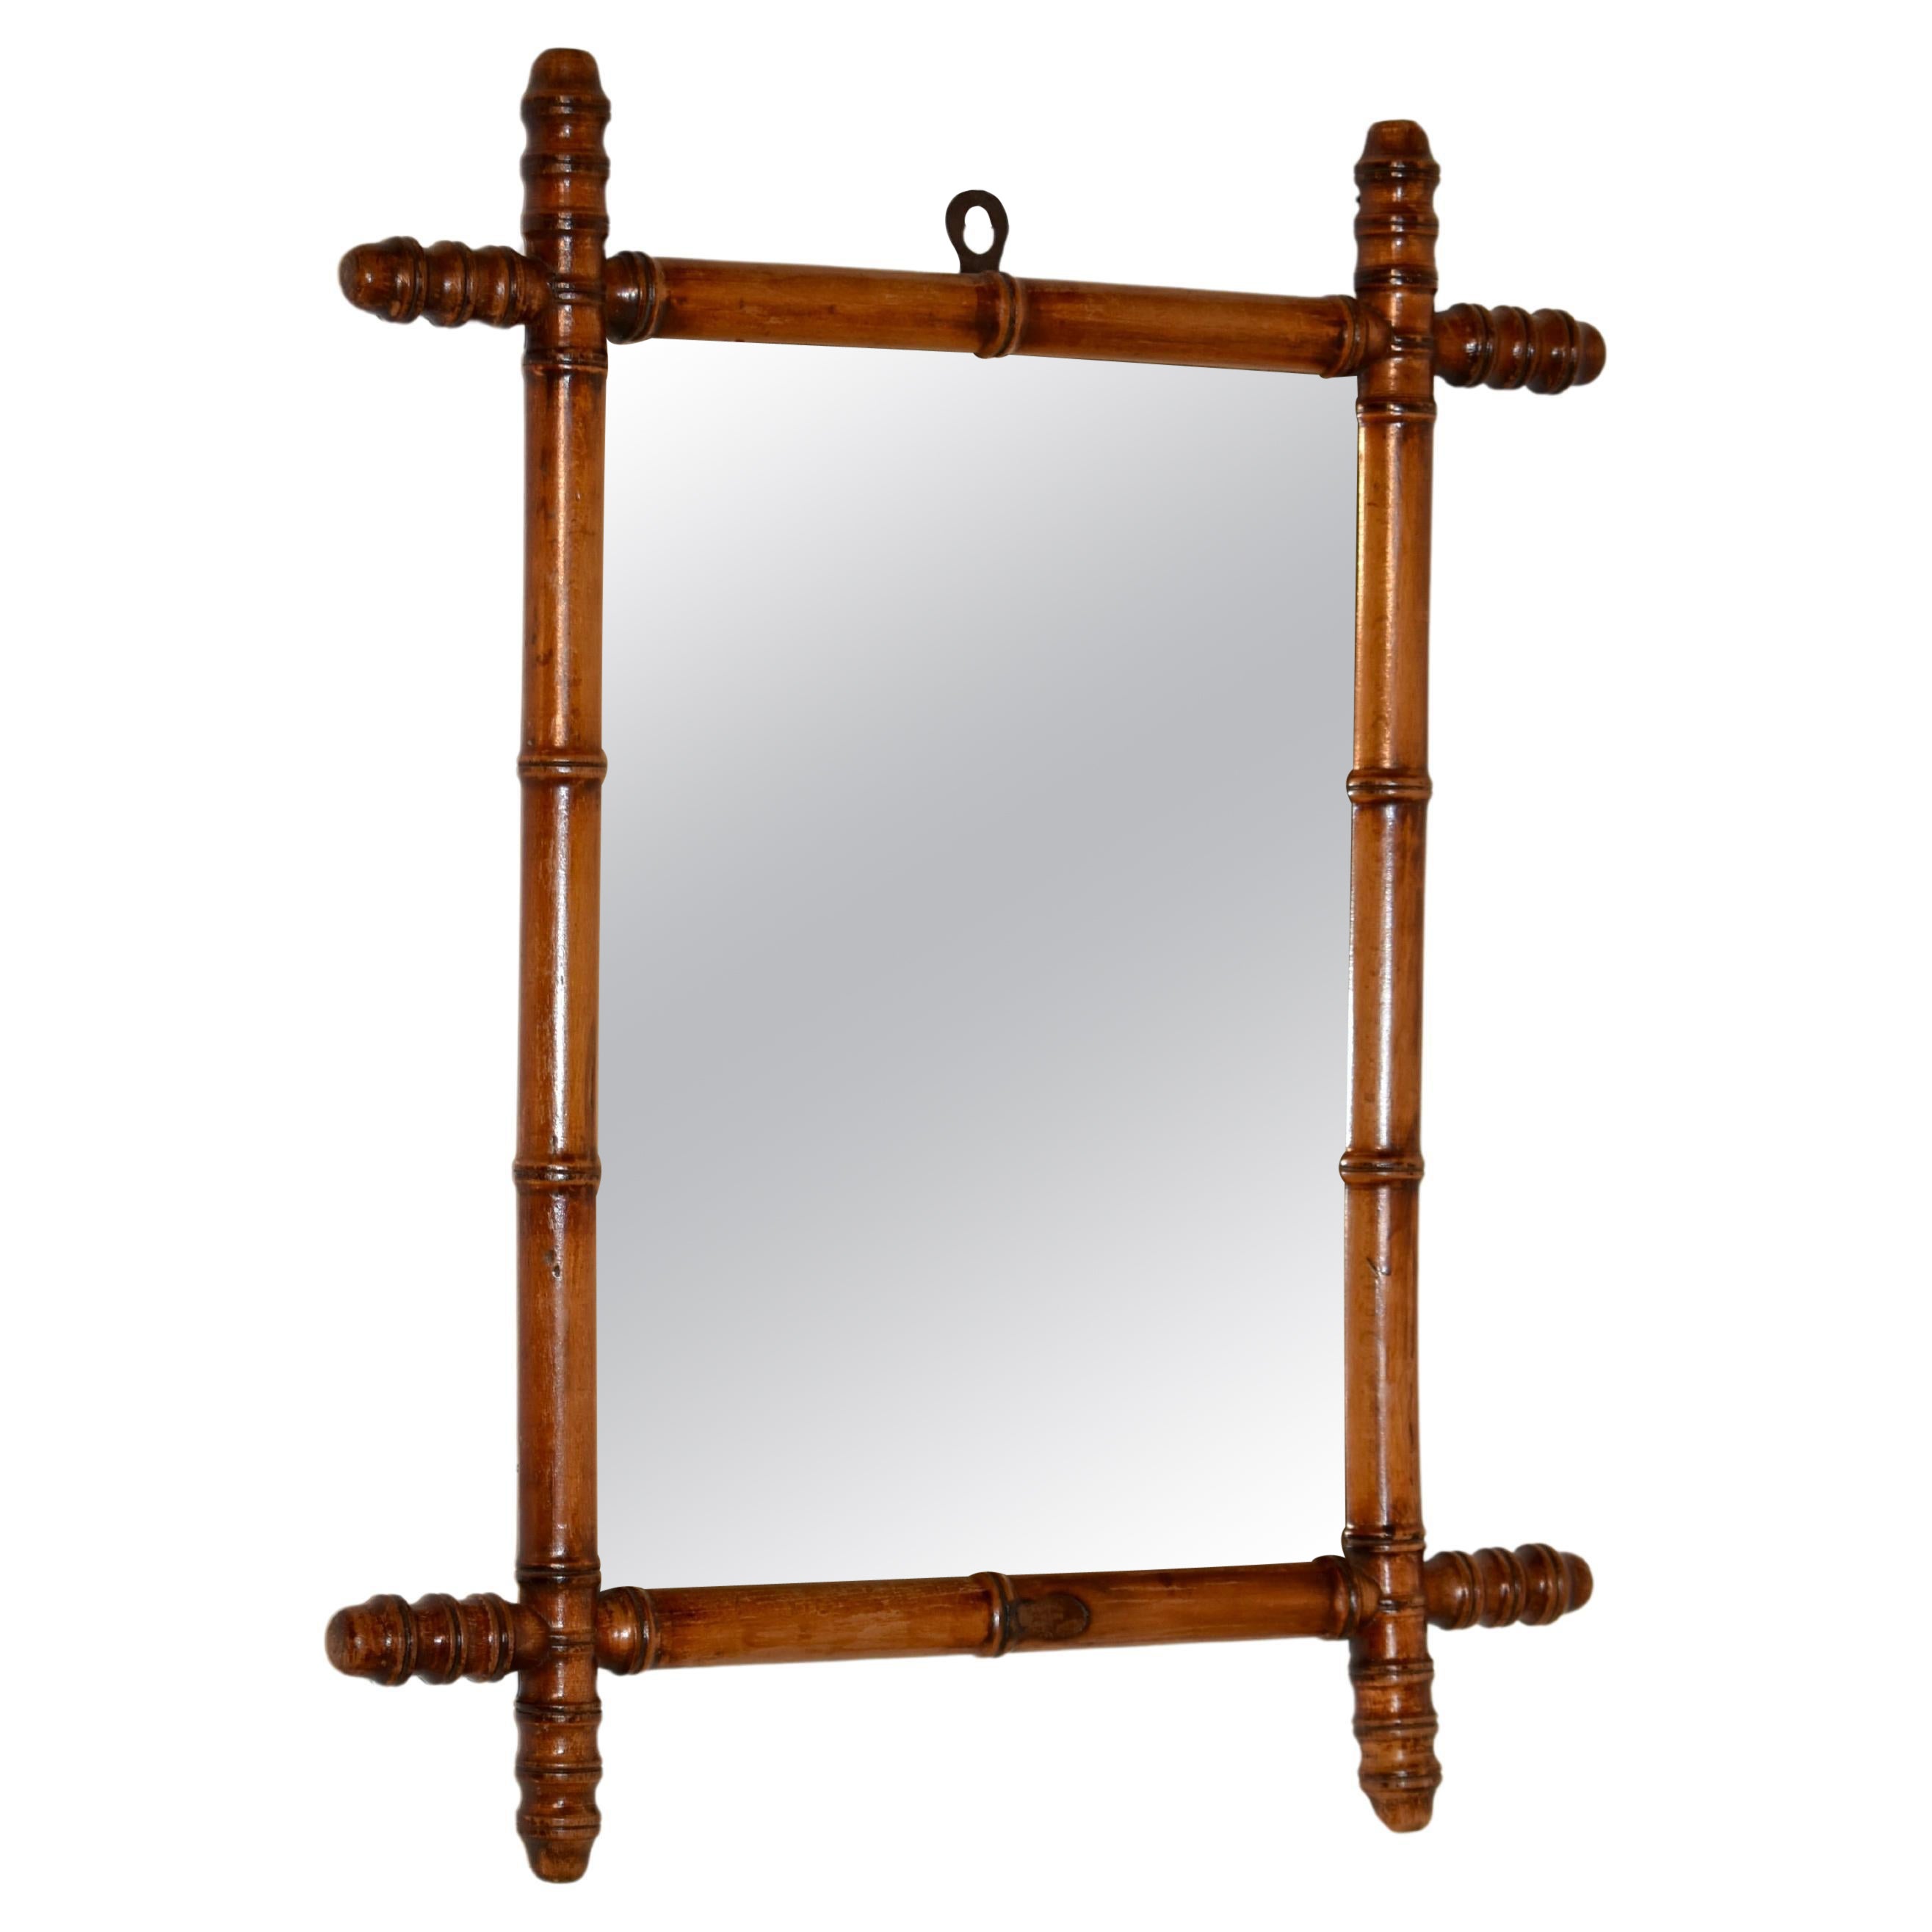 Late 19th Century French Faux Bamboo Mirror